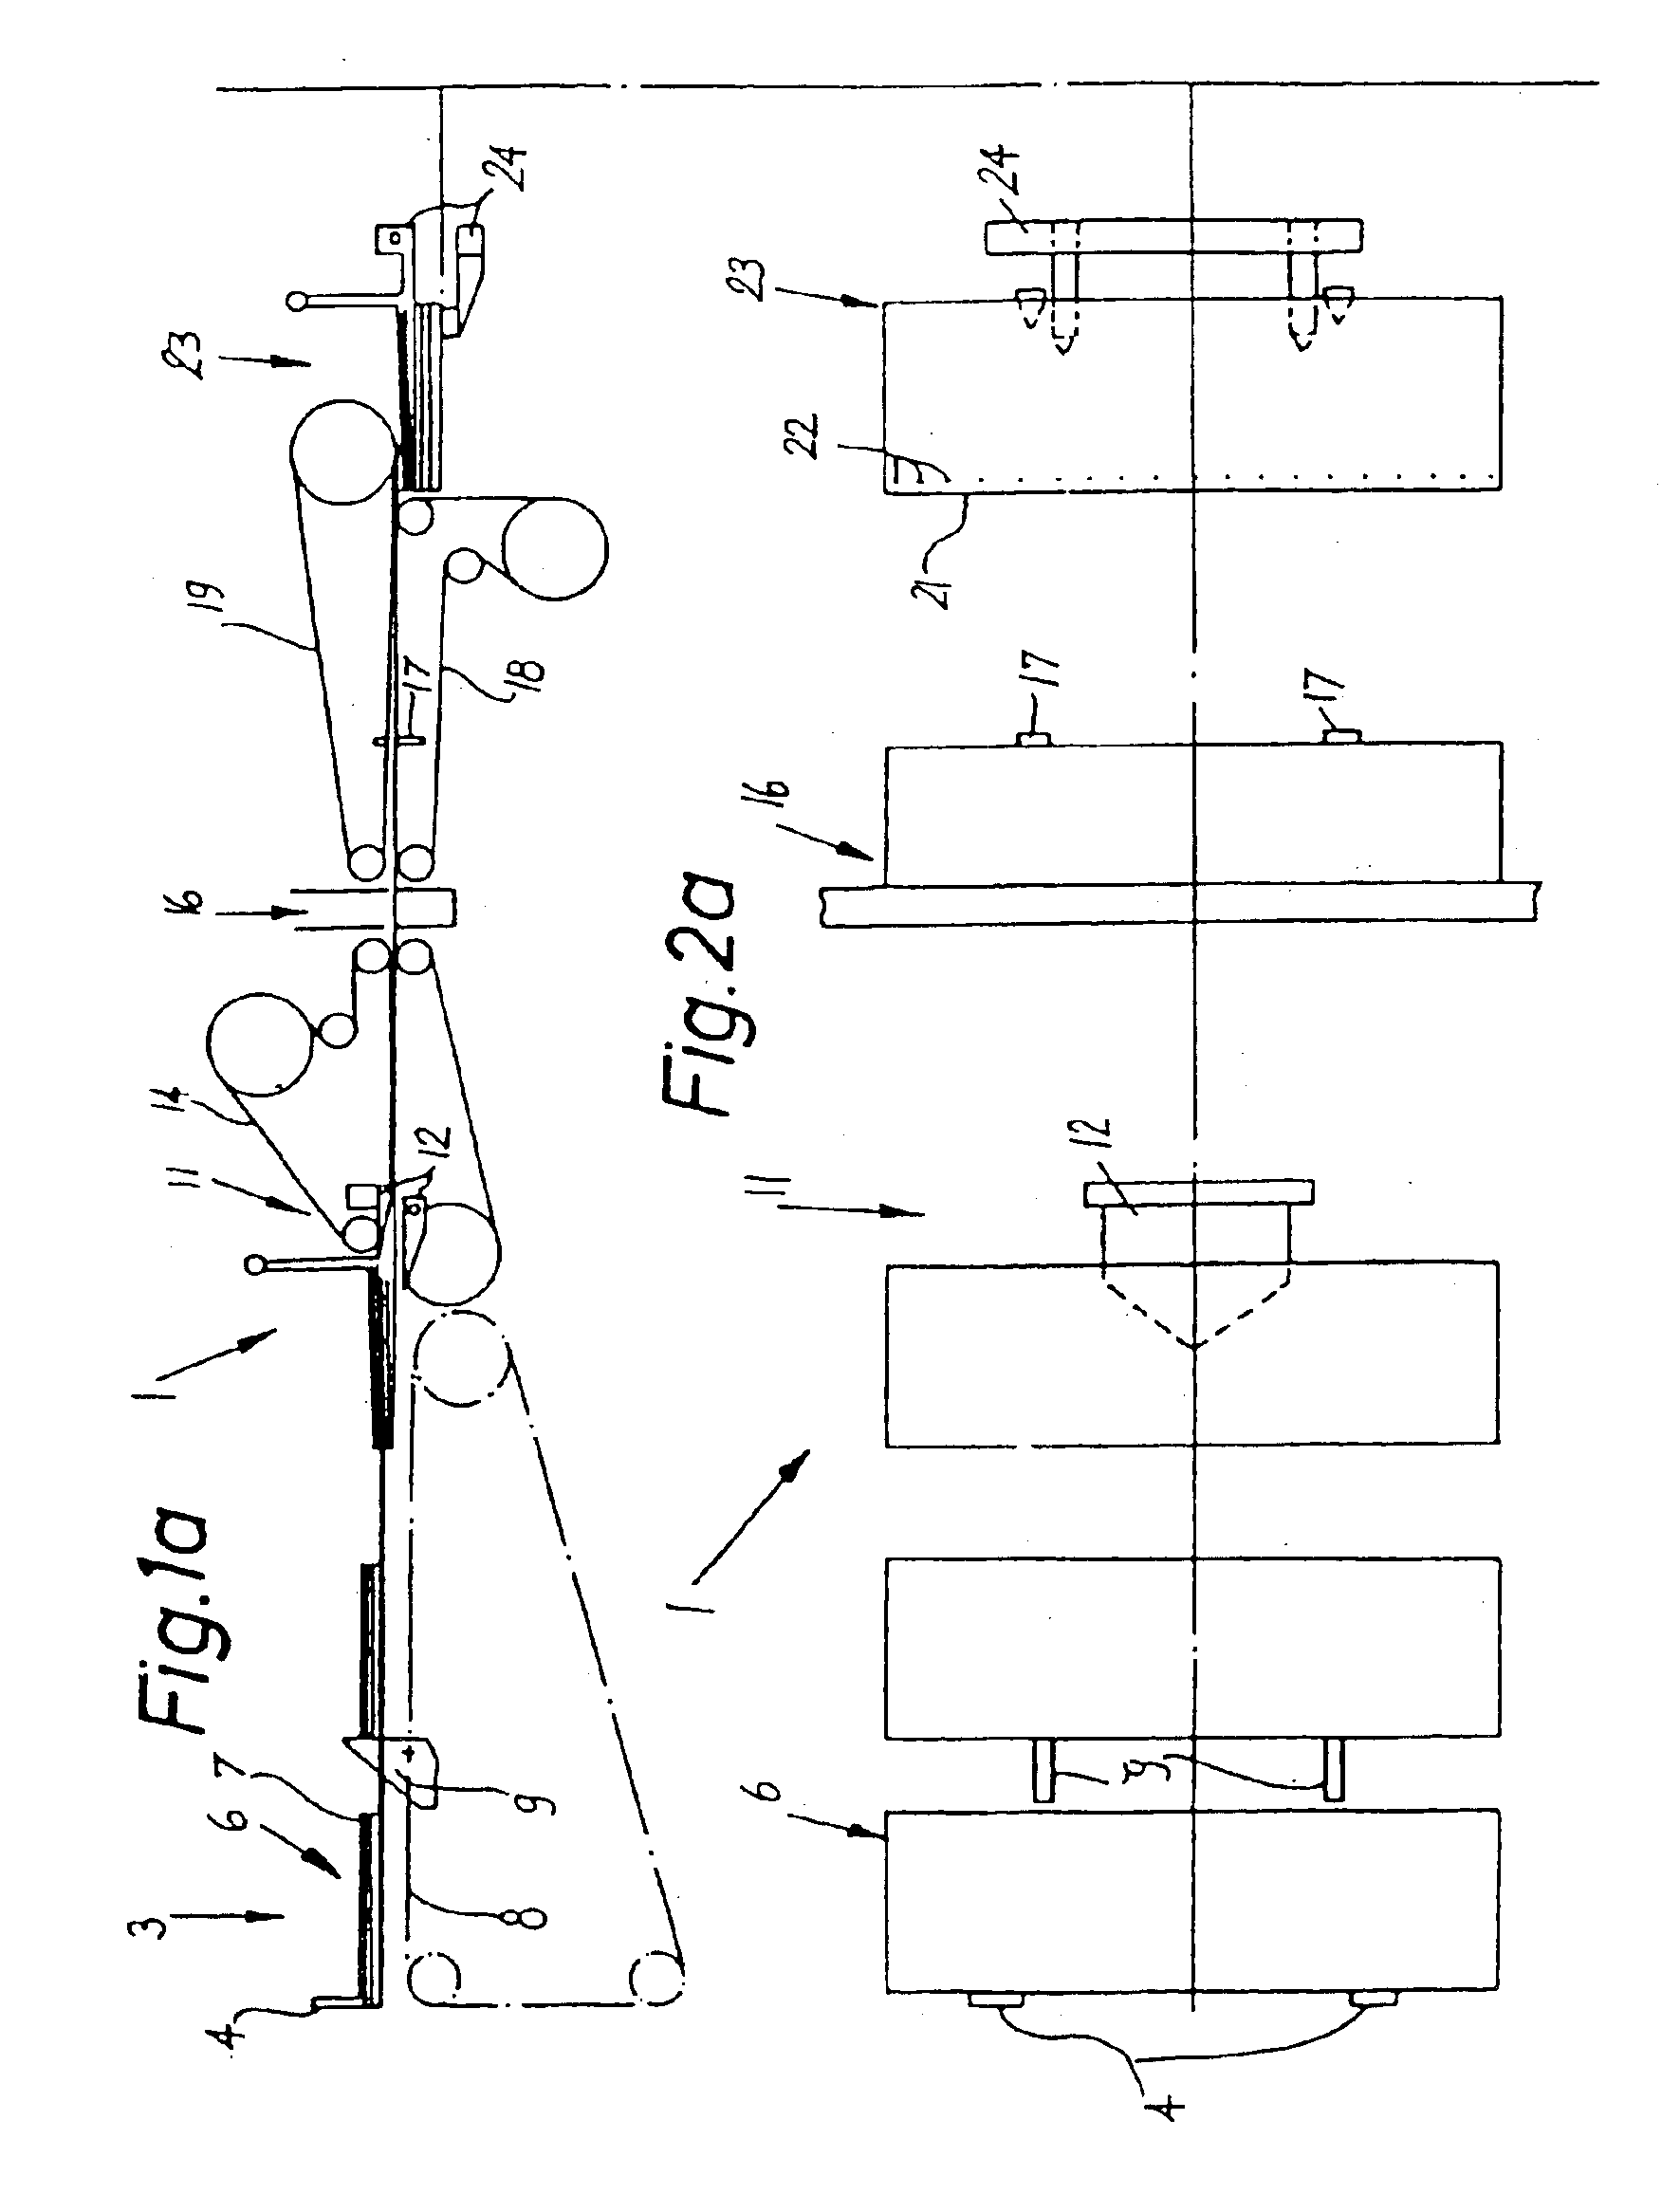 Apparatus for coupling stacked sheets